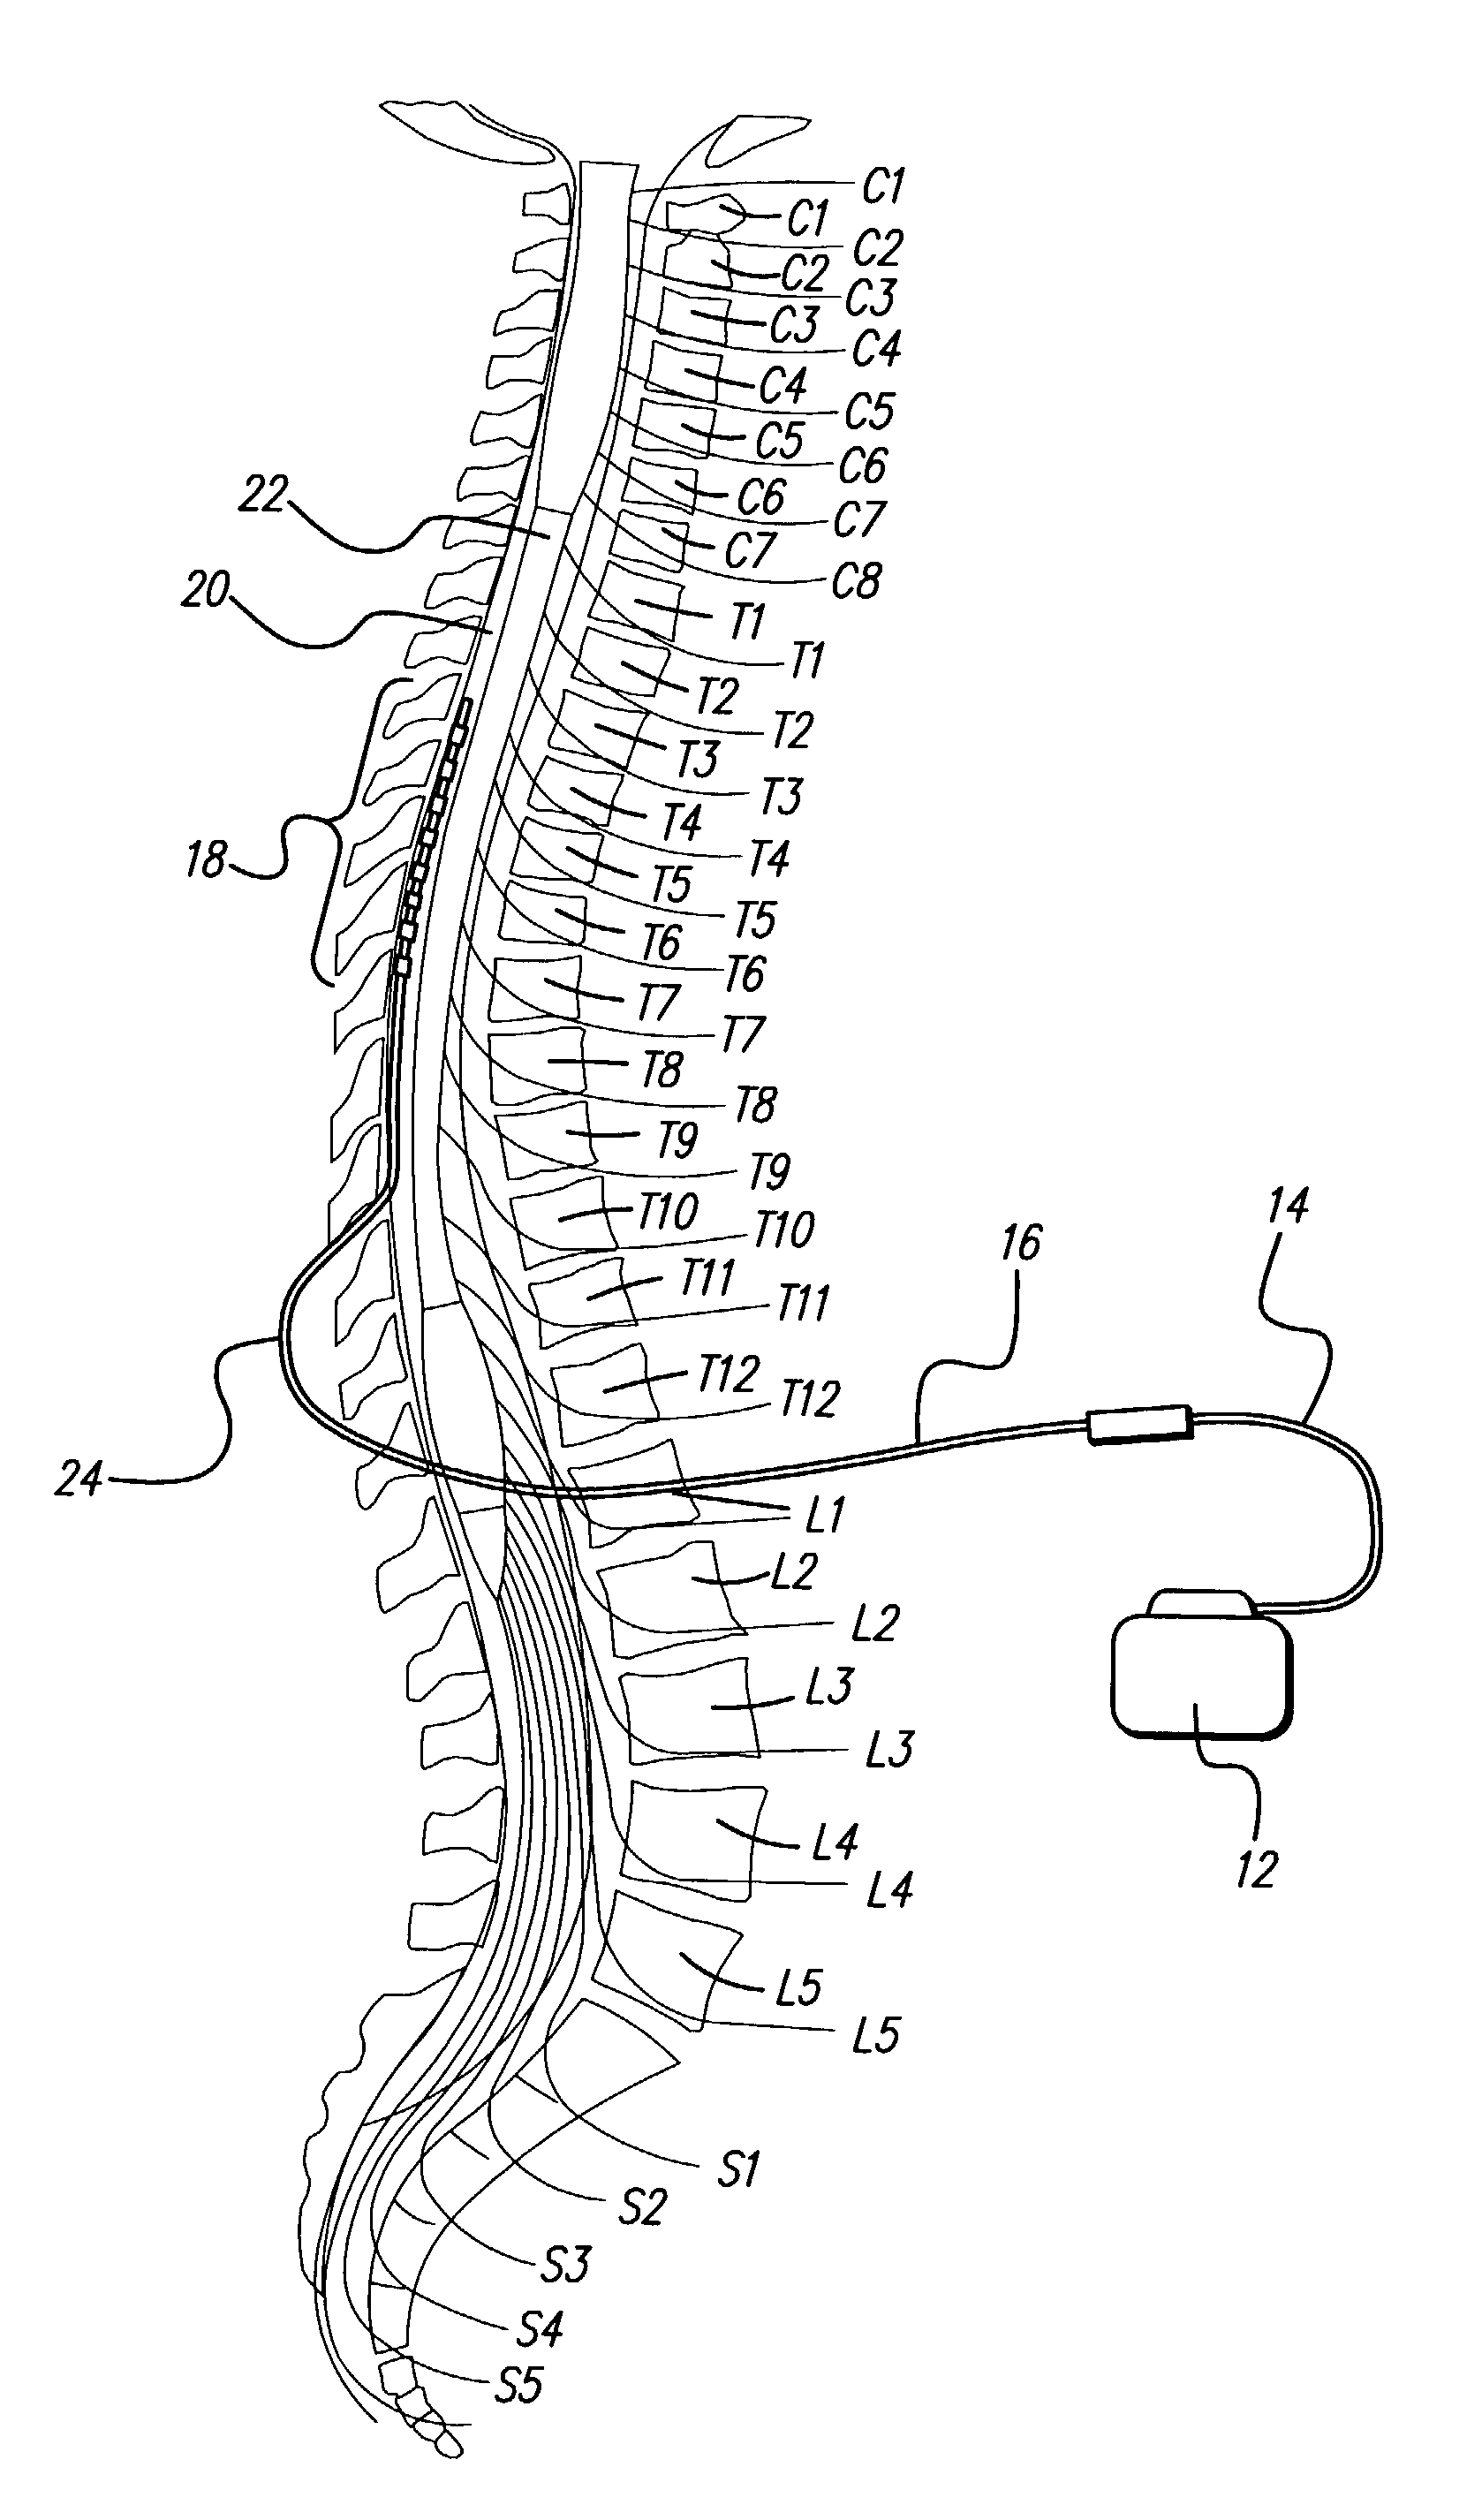 Method for increasing the therapeutic ratio/usage range in a neurostimulator